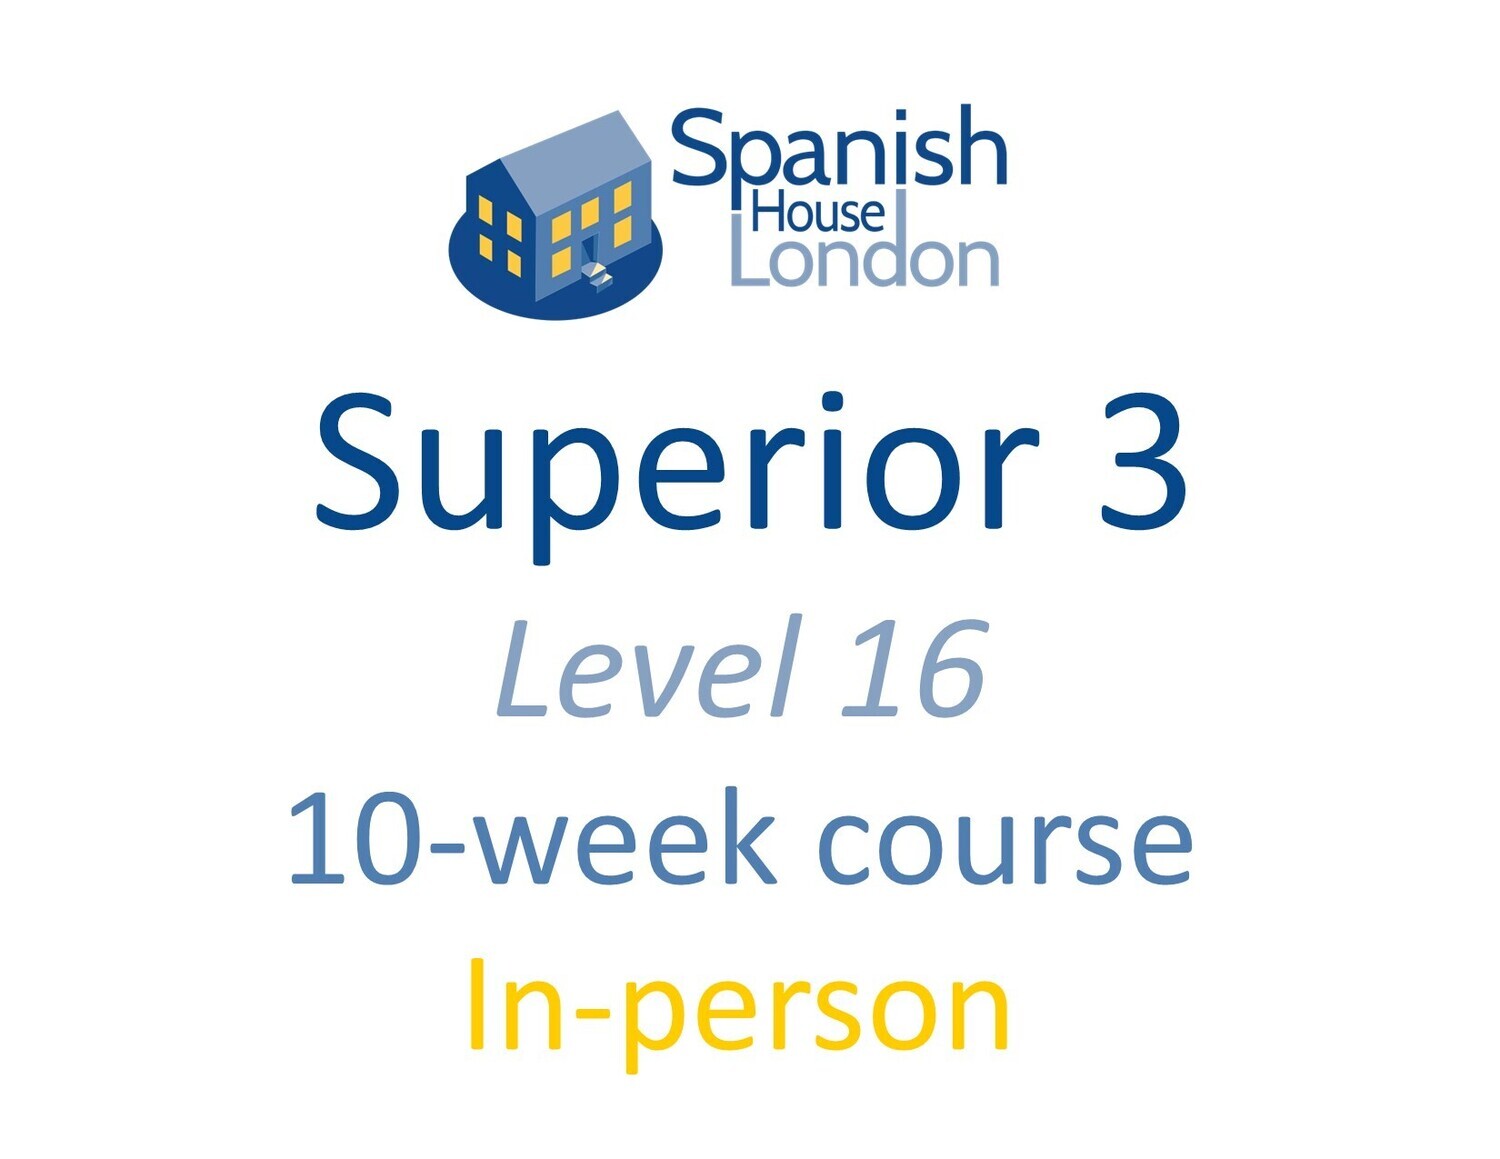 Superior 3 Course starting on 10th August at 7.30pm in Clapham North